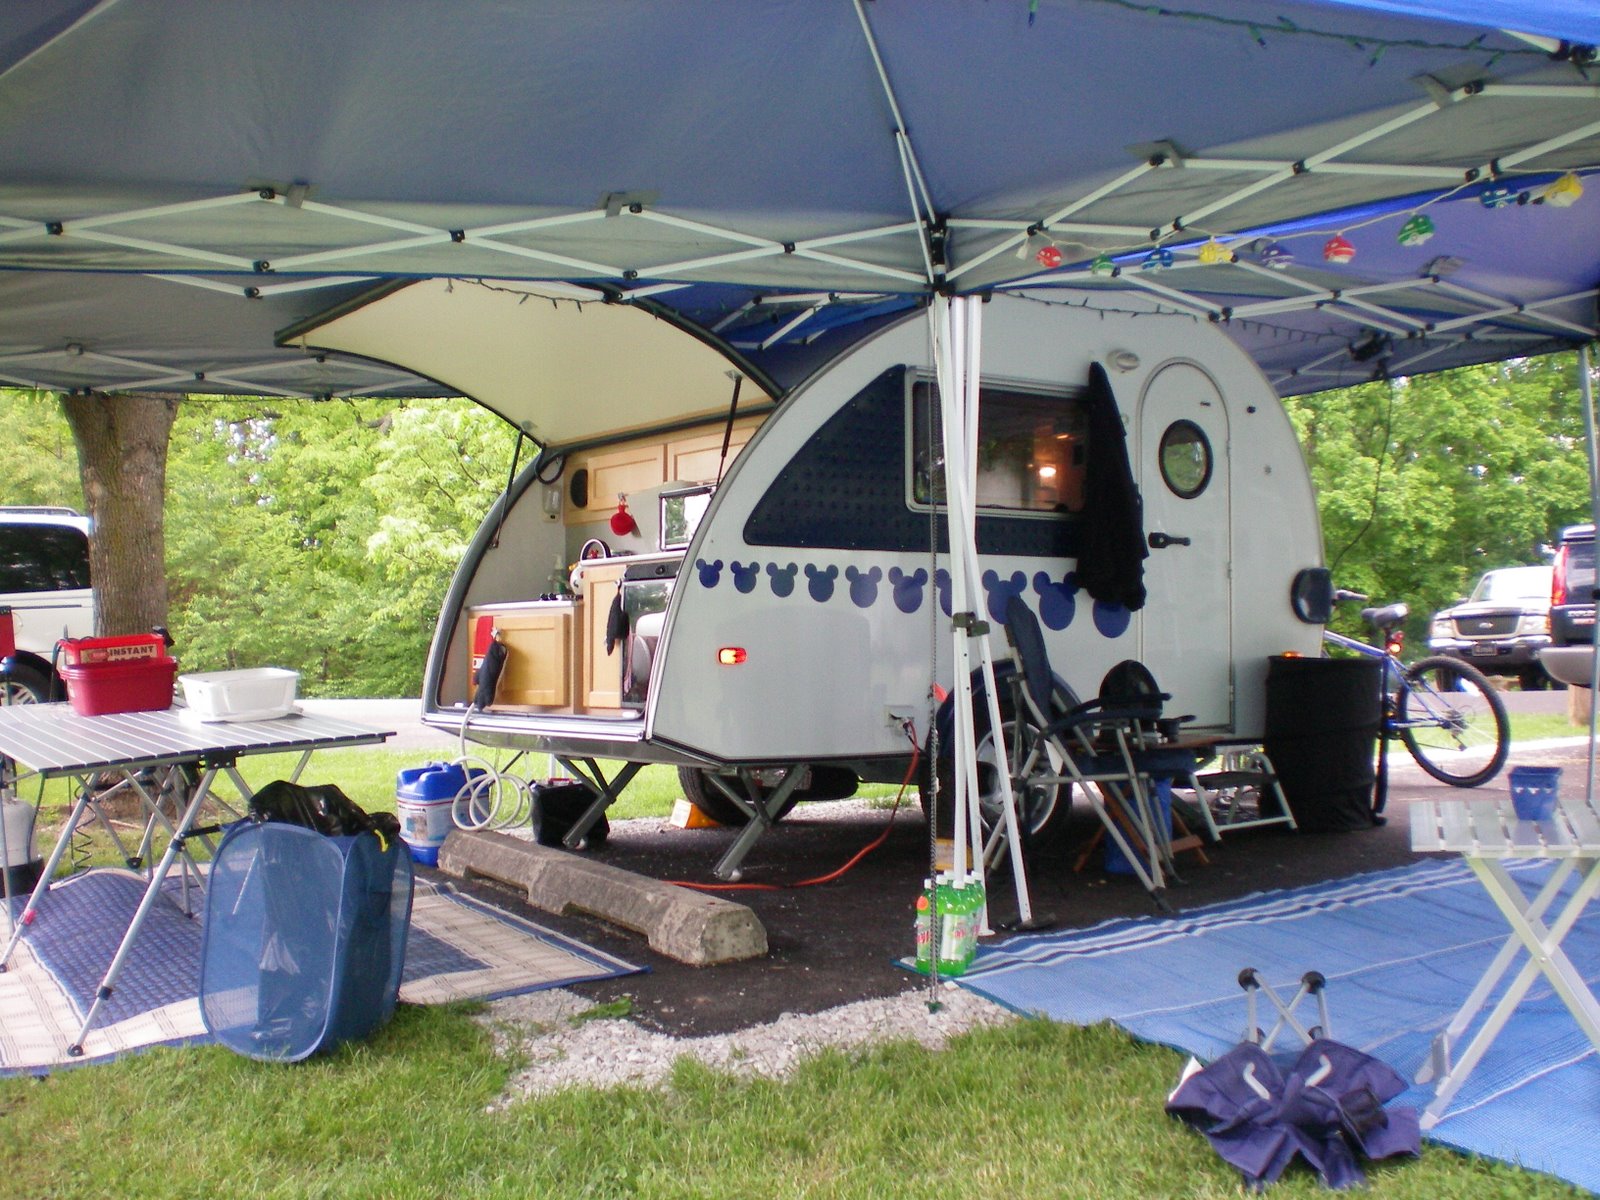 [Camping+Pictures+207.jpg]